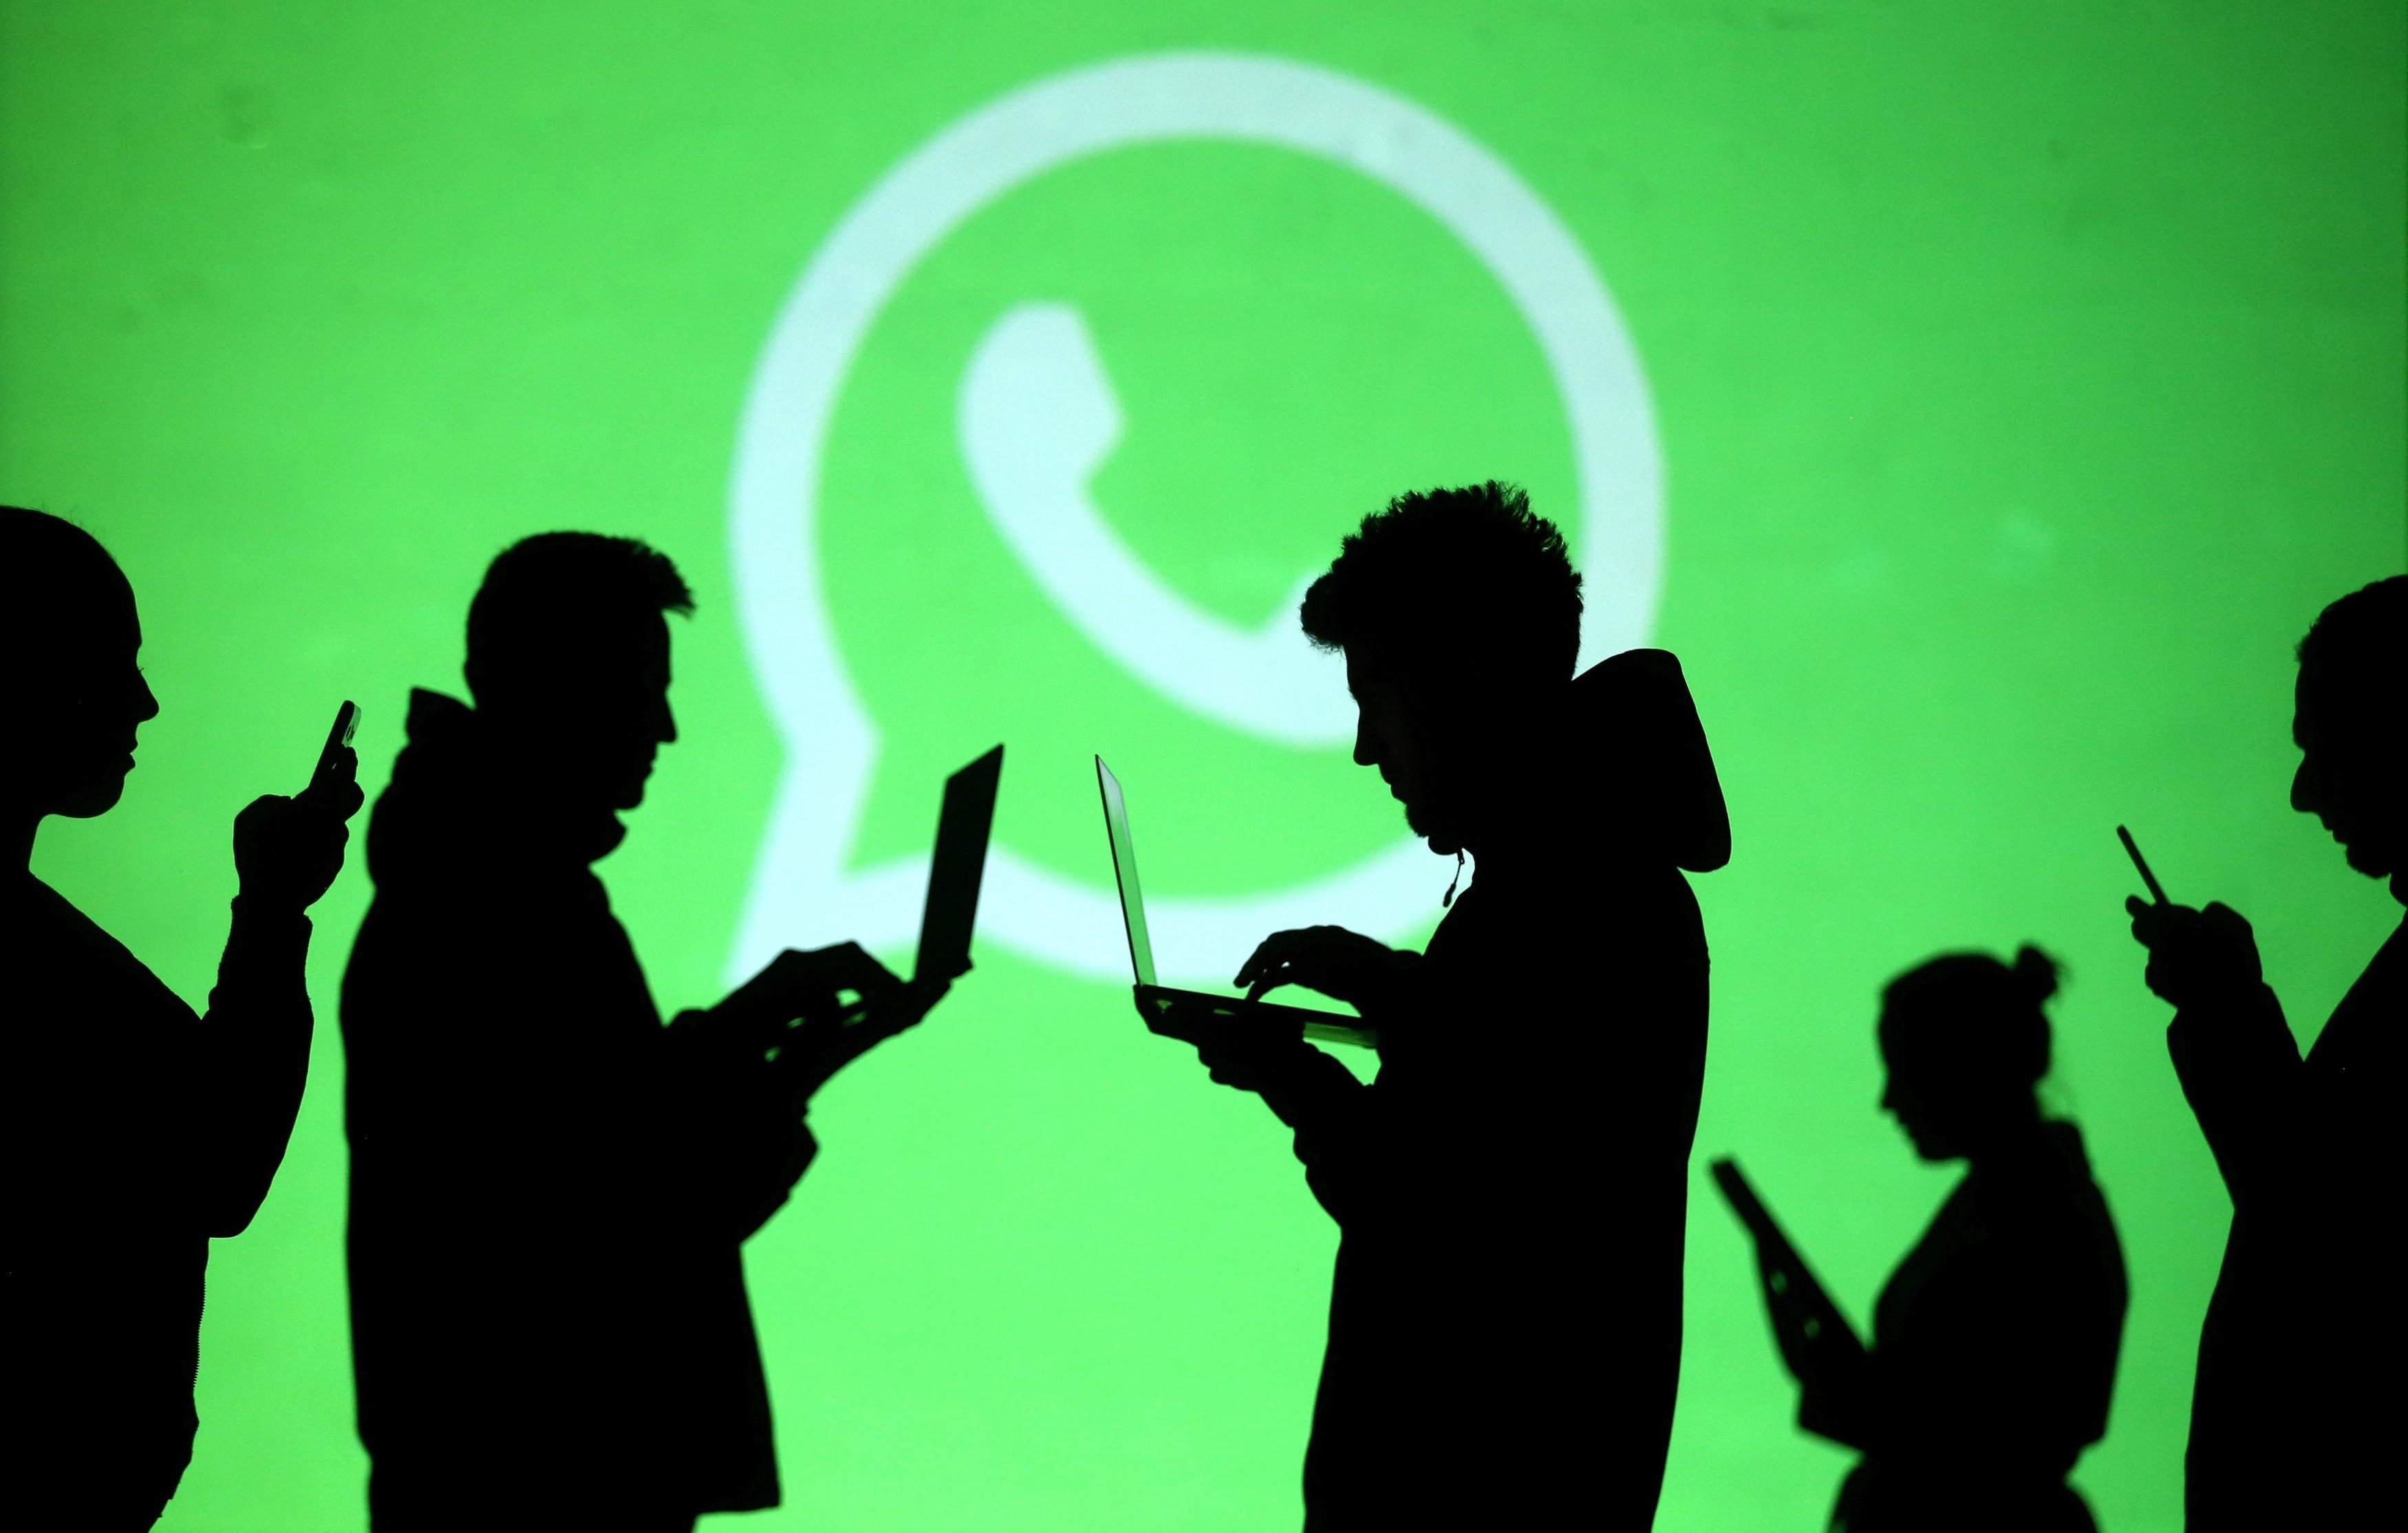 WhatsApp Planning To Let Users Retain The Original Image Quality 28057